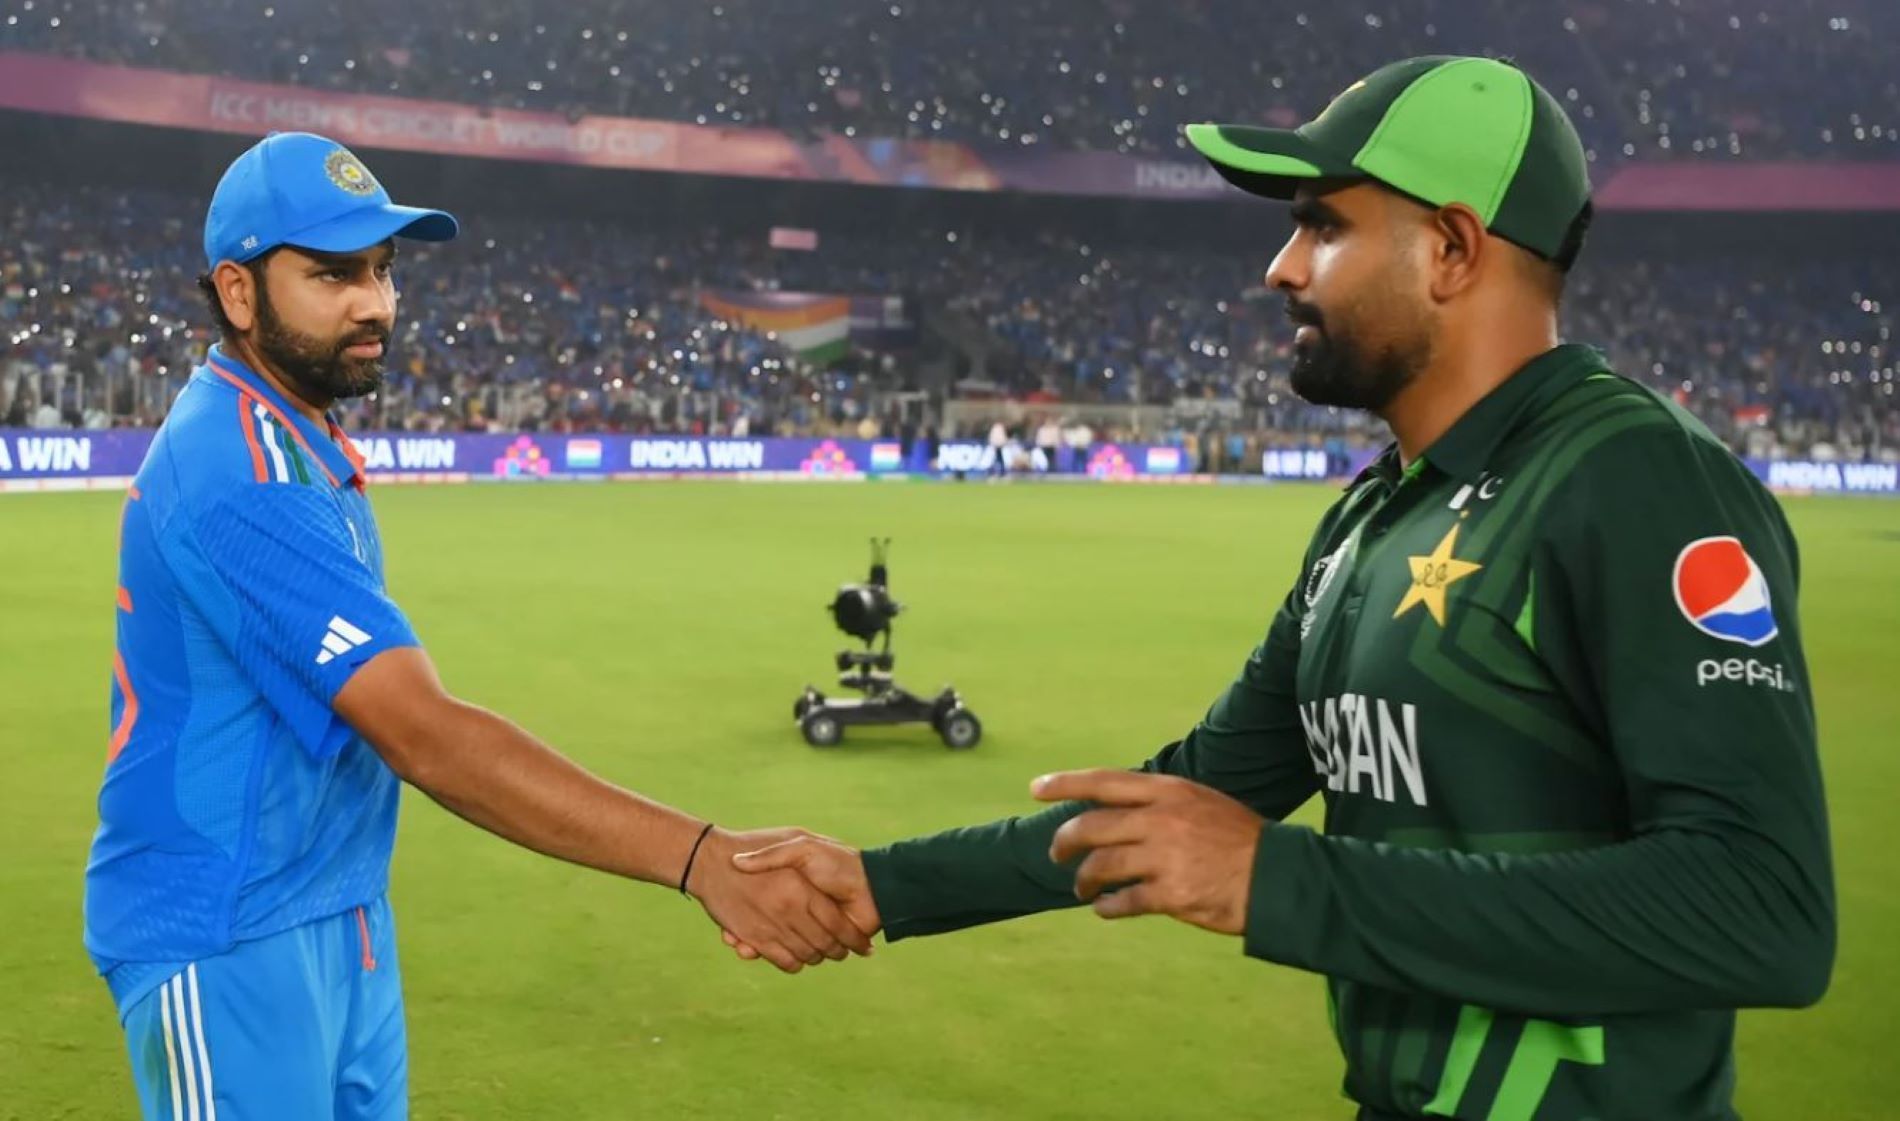 Rohit Sharma and Babar Azam shake hands after India completed another comfortable win.